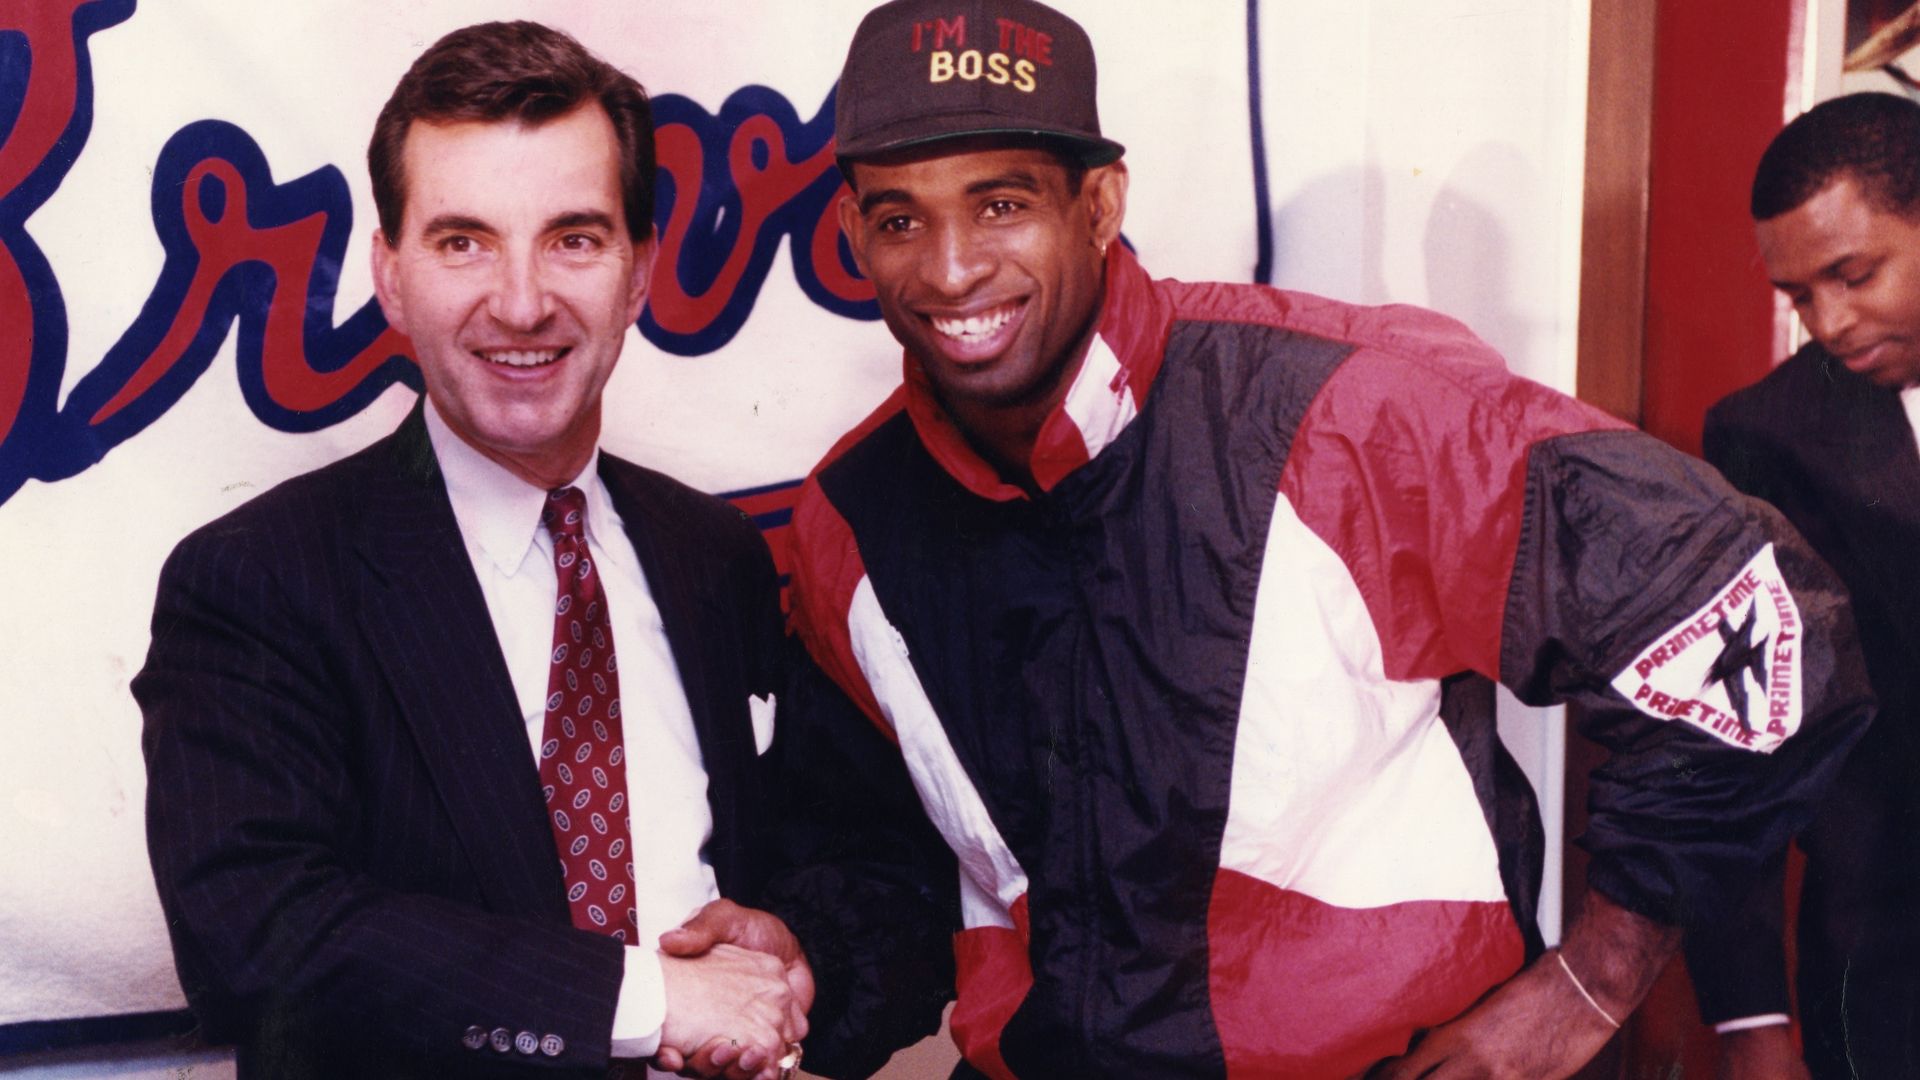 A man in a suit shakes hands in front of an Atlanta Braves sign with an athlete wearing a red, black and white track suit and hat reading "I'm the boss"